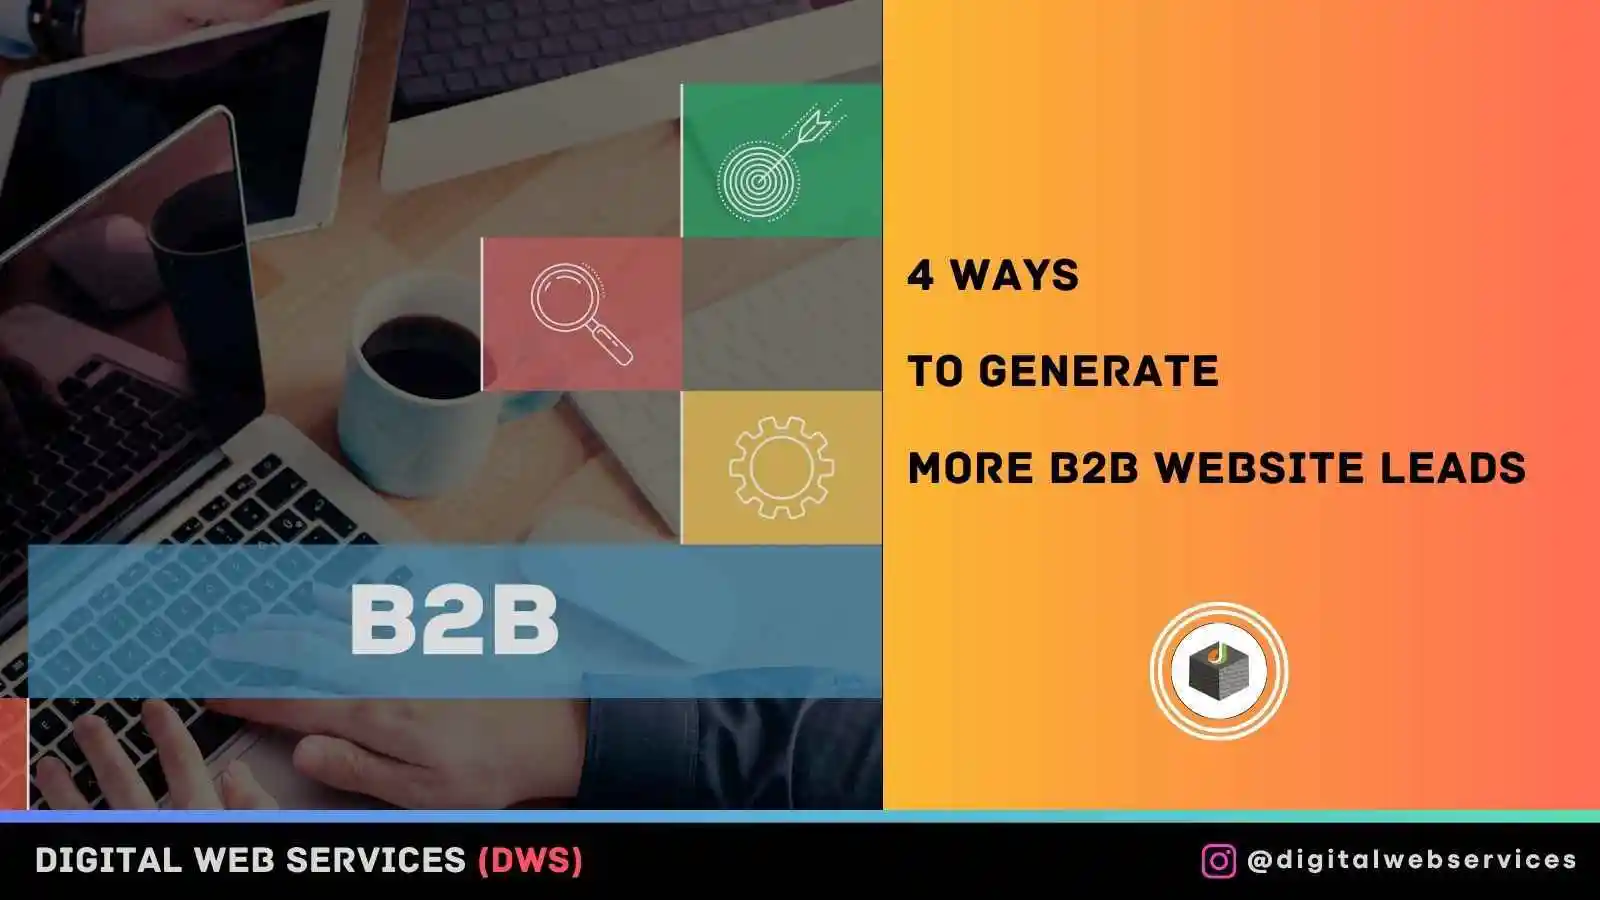 4 Ways to Generate More B2B Website Leads